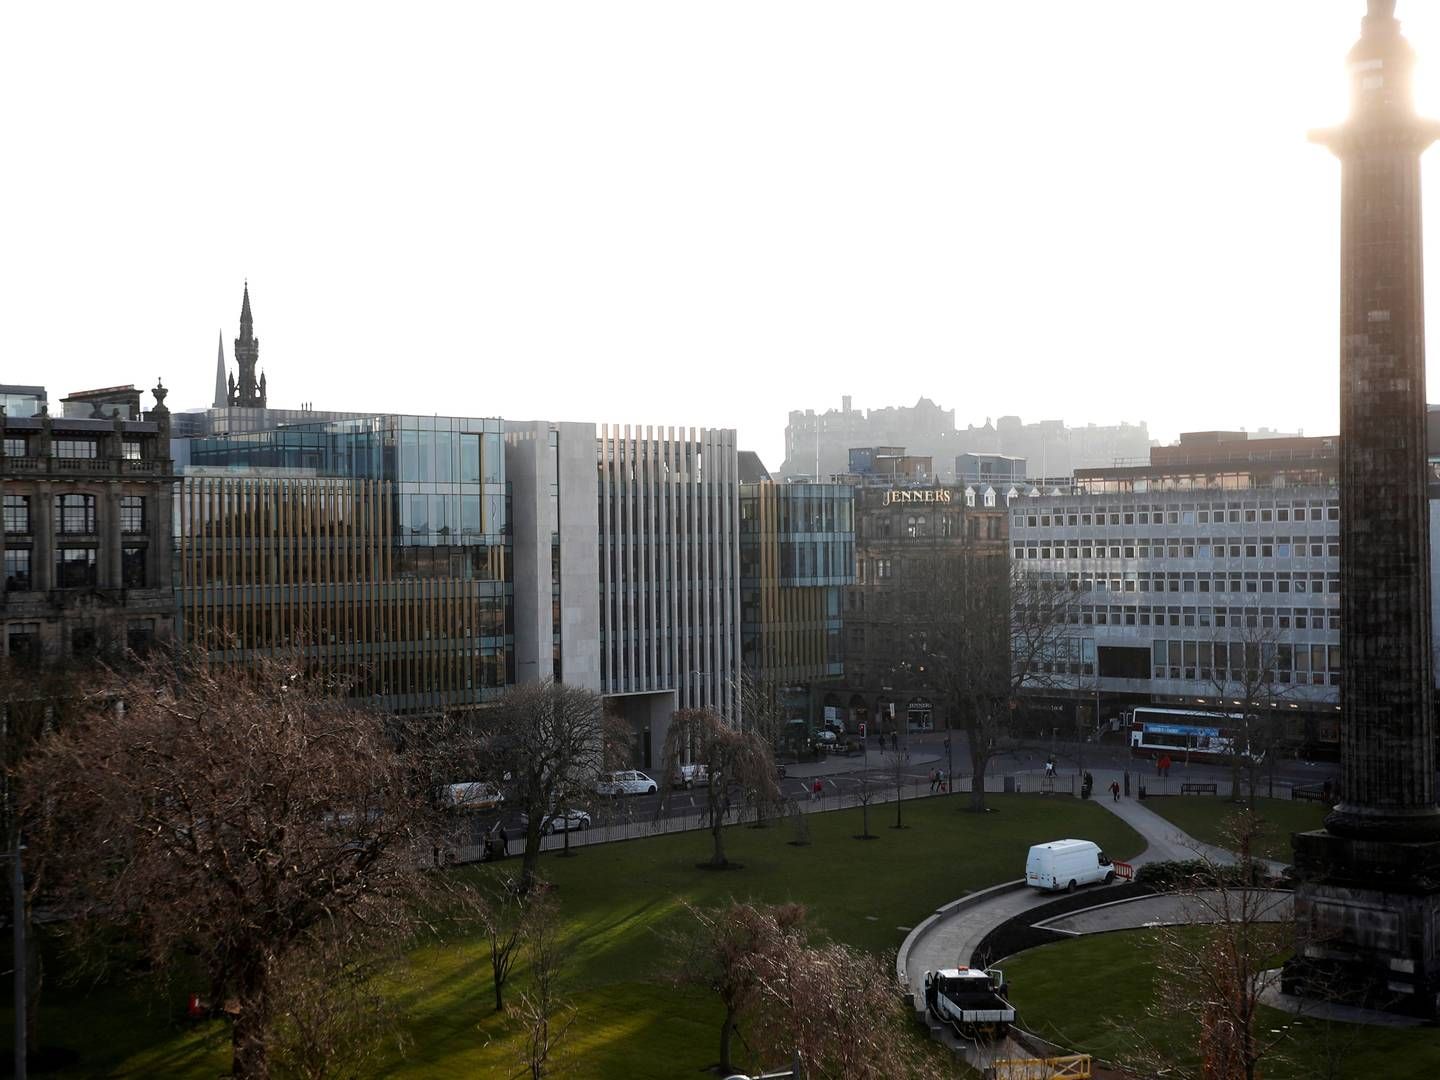 The offices of Standard Life Aberdeen in Saint Andrew Square Edinburgh, Scotland, Britain February 15, 2019. | Photo: RUSSELL CHEYNE/REUTERS / X02429